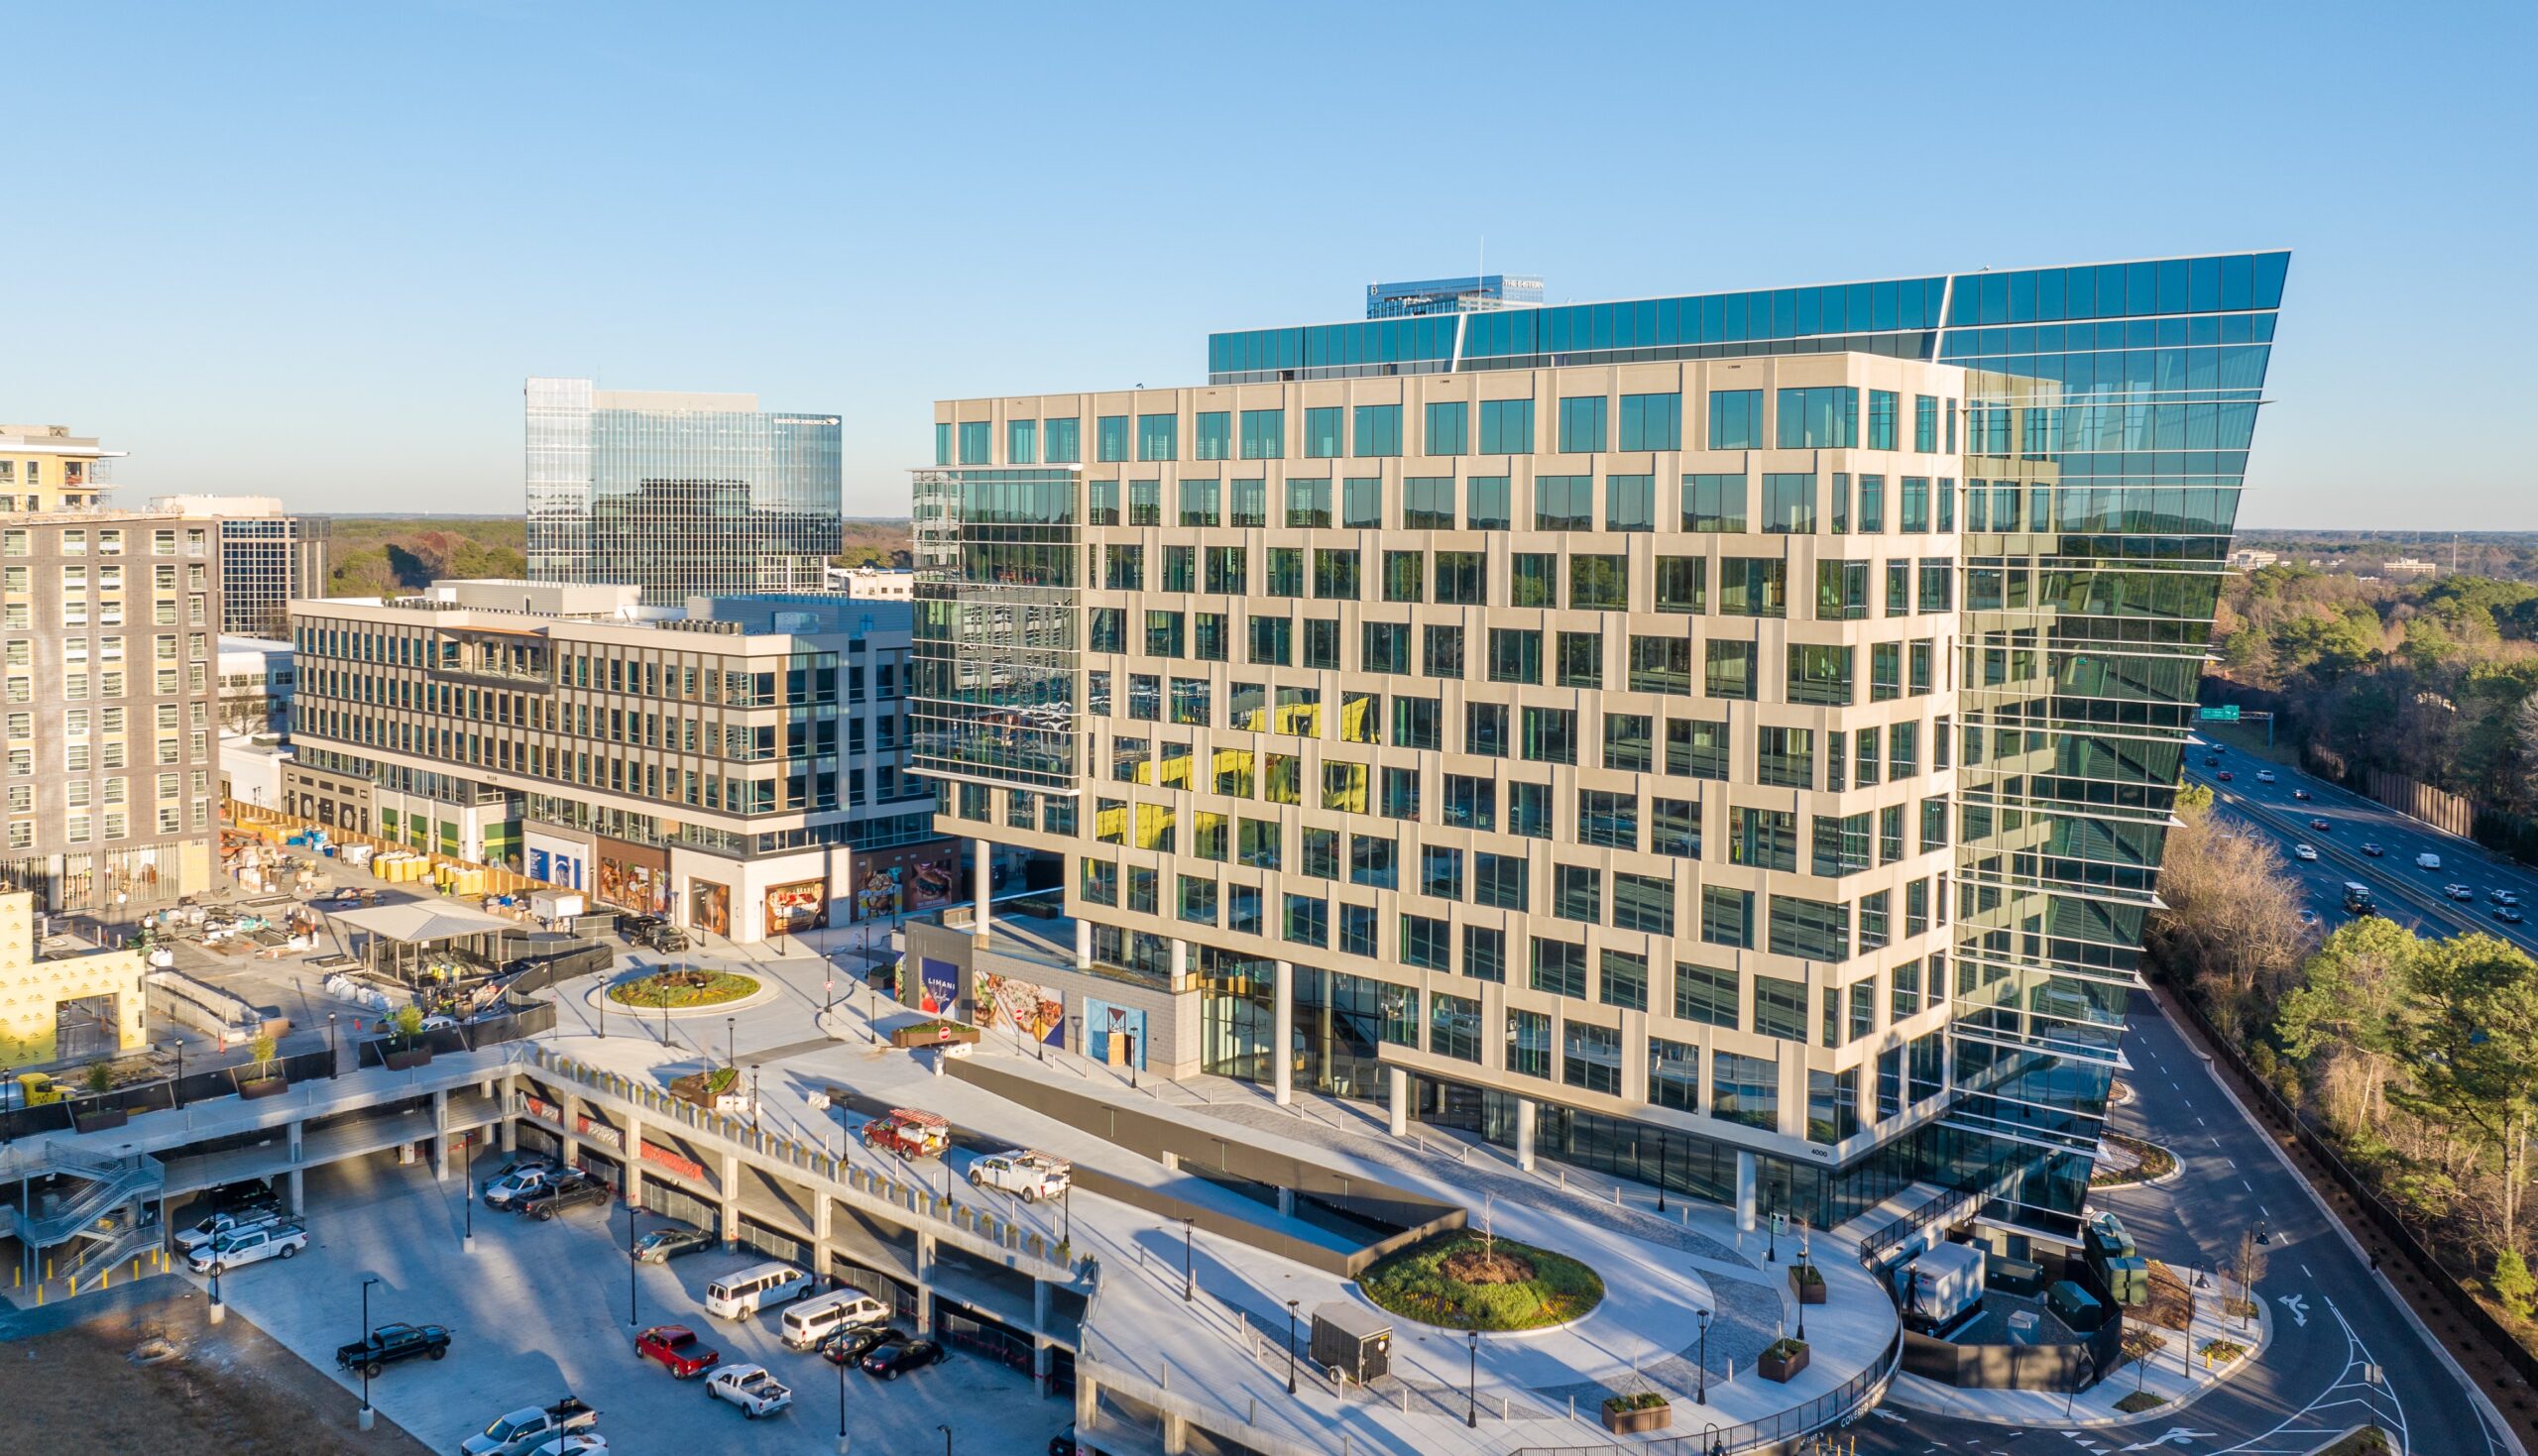 Kane Realty Signs Over 72,500 SF in Office Leases with Multiple Tenants at Trophy-Class One North Hills Tower at North Hills in Midtown Raleigh, NC